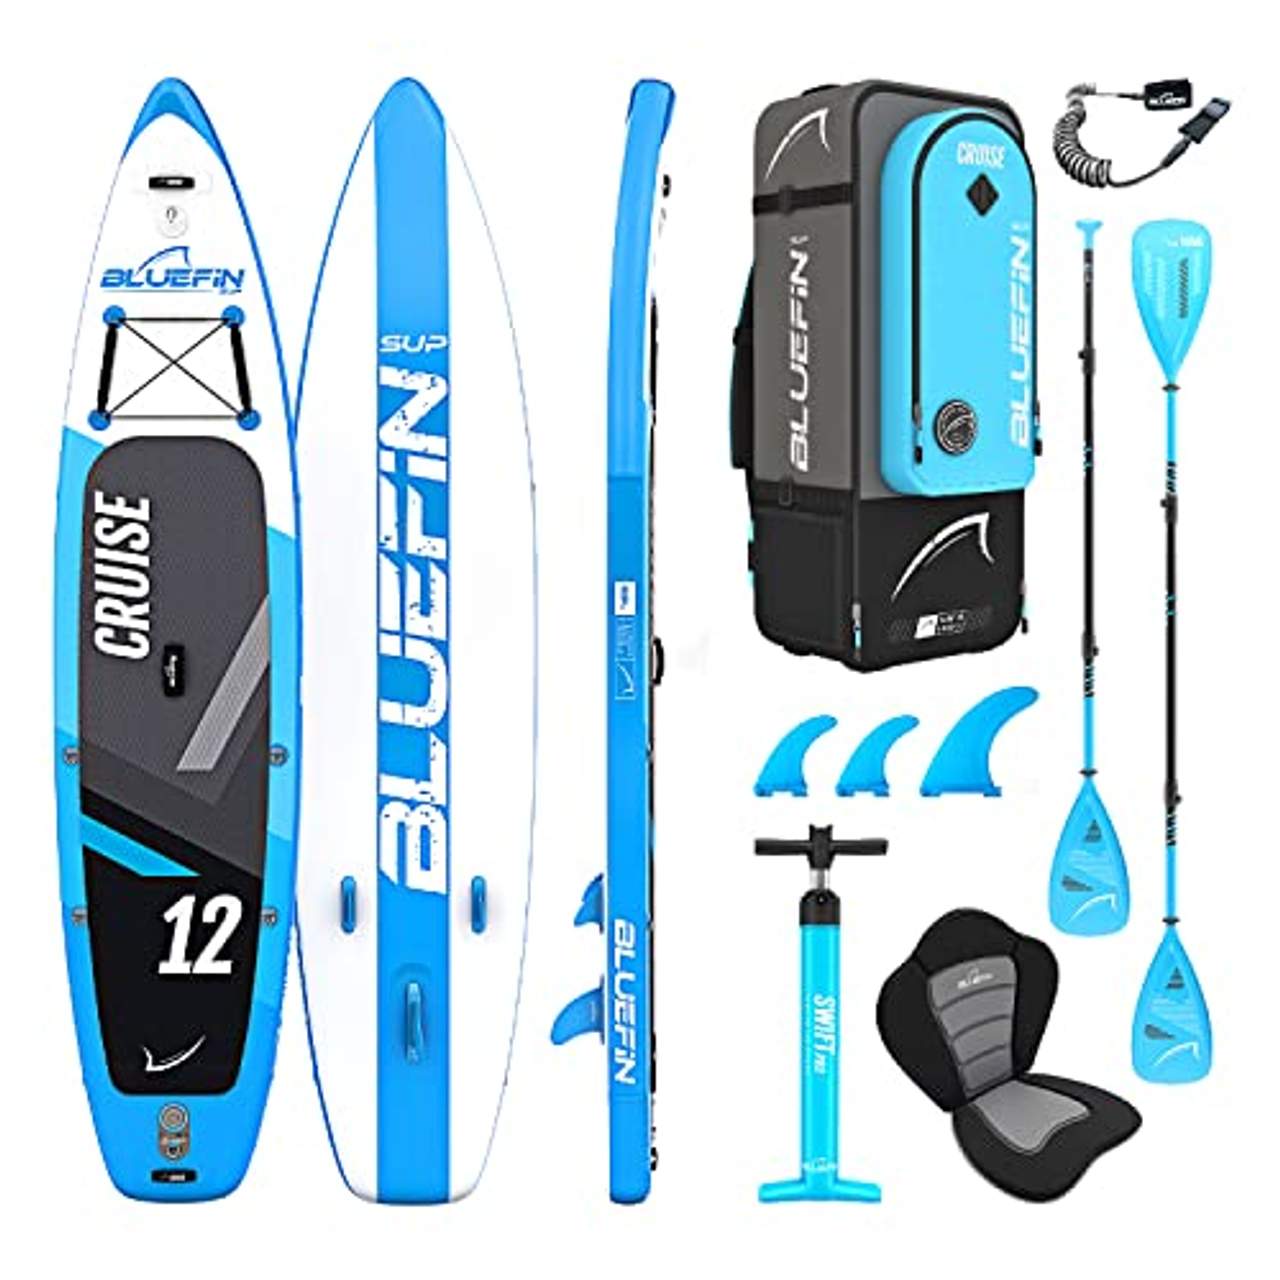 Bluefin SUP Cruise 12" Stand Up Paddle Board